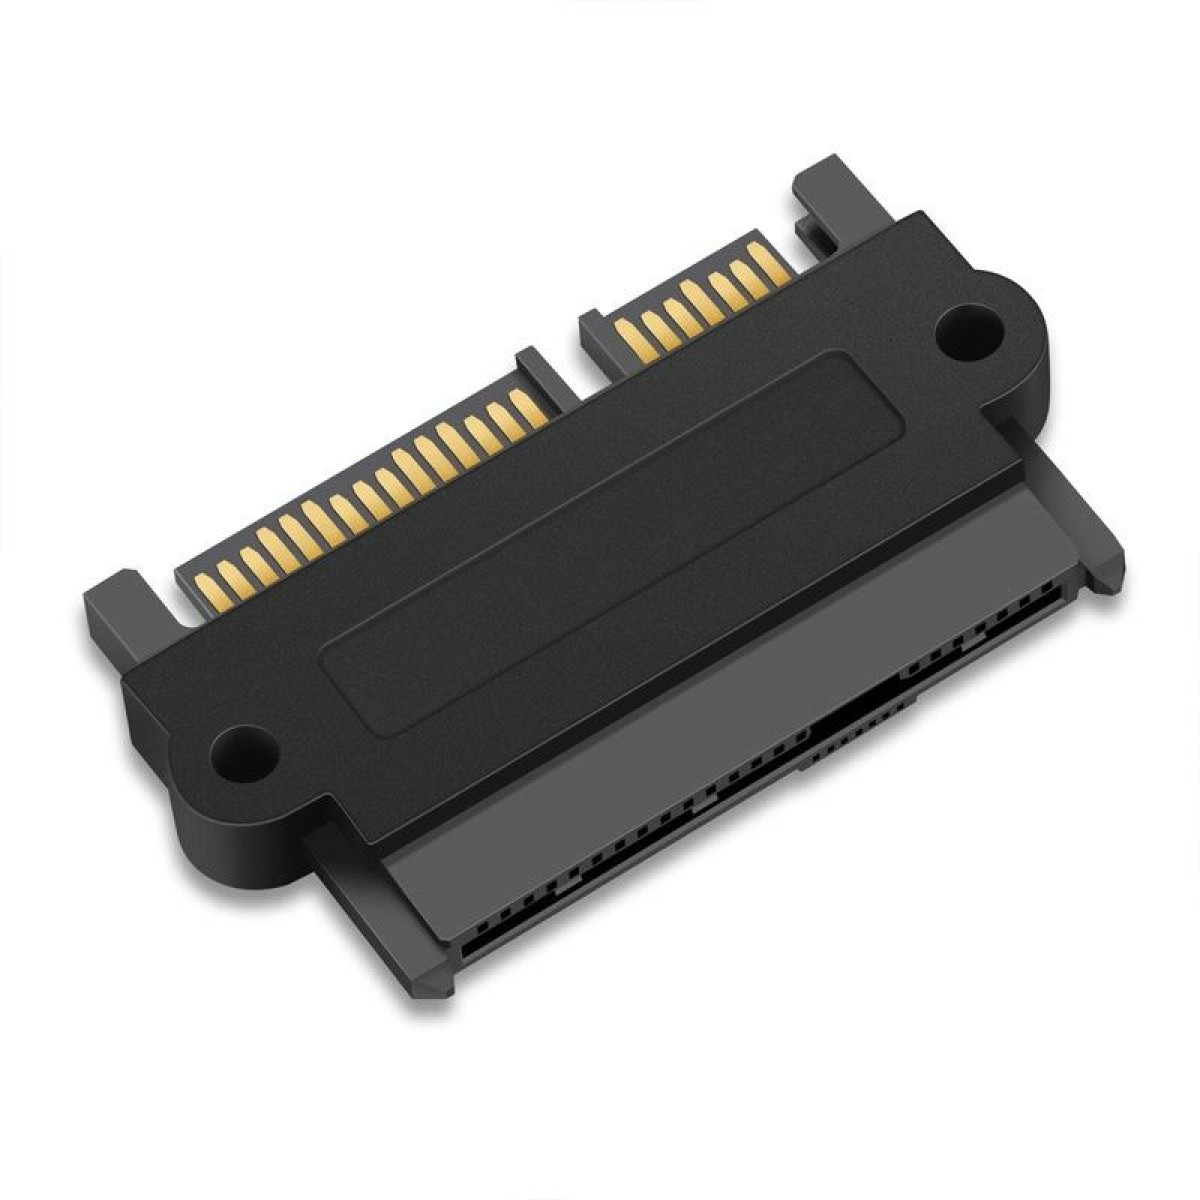 Professional SFF-8482 SAS to SATA 180 Degrees Angle Adapter for Motherboard